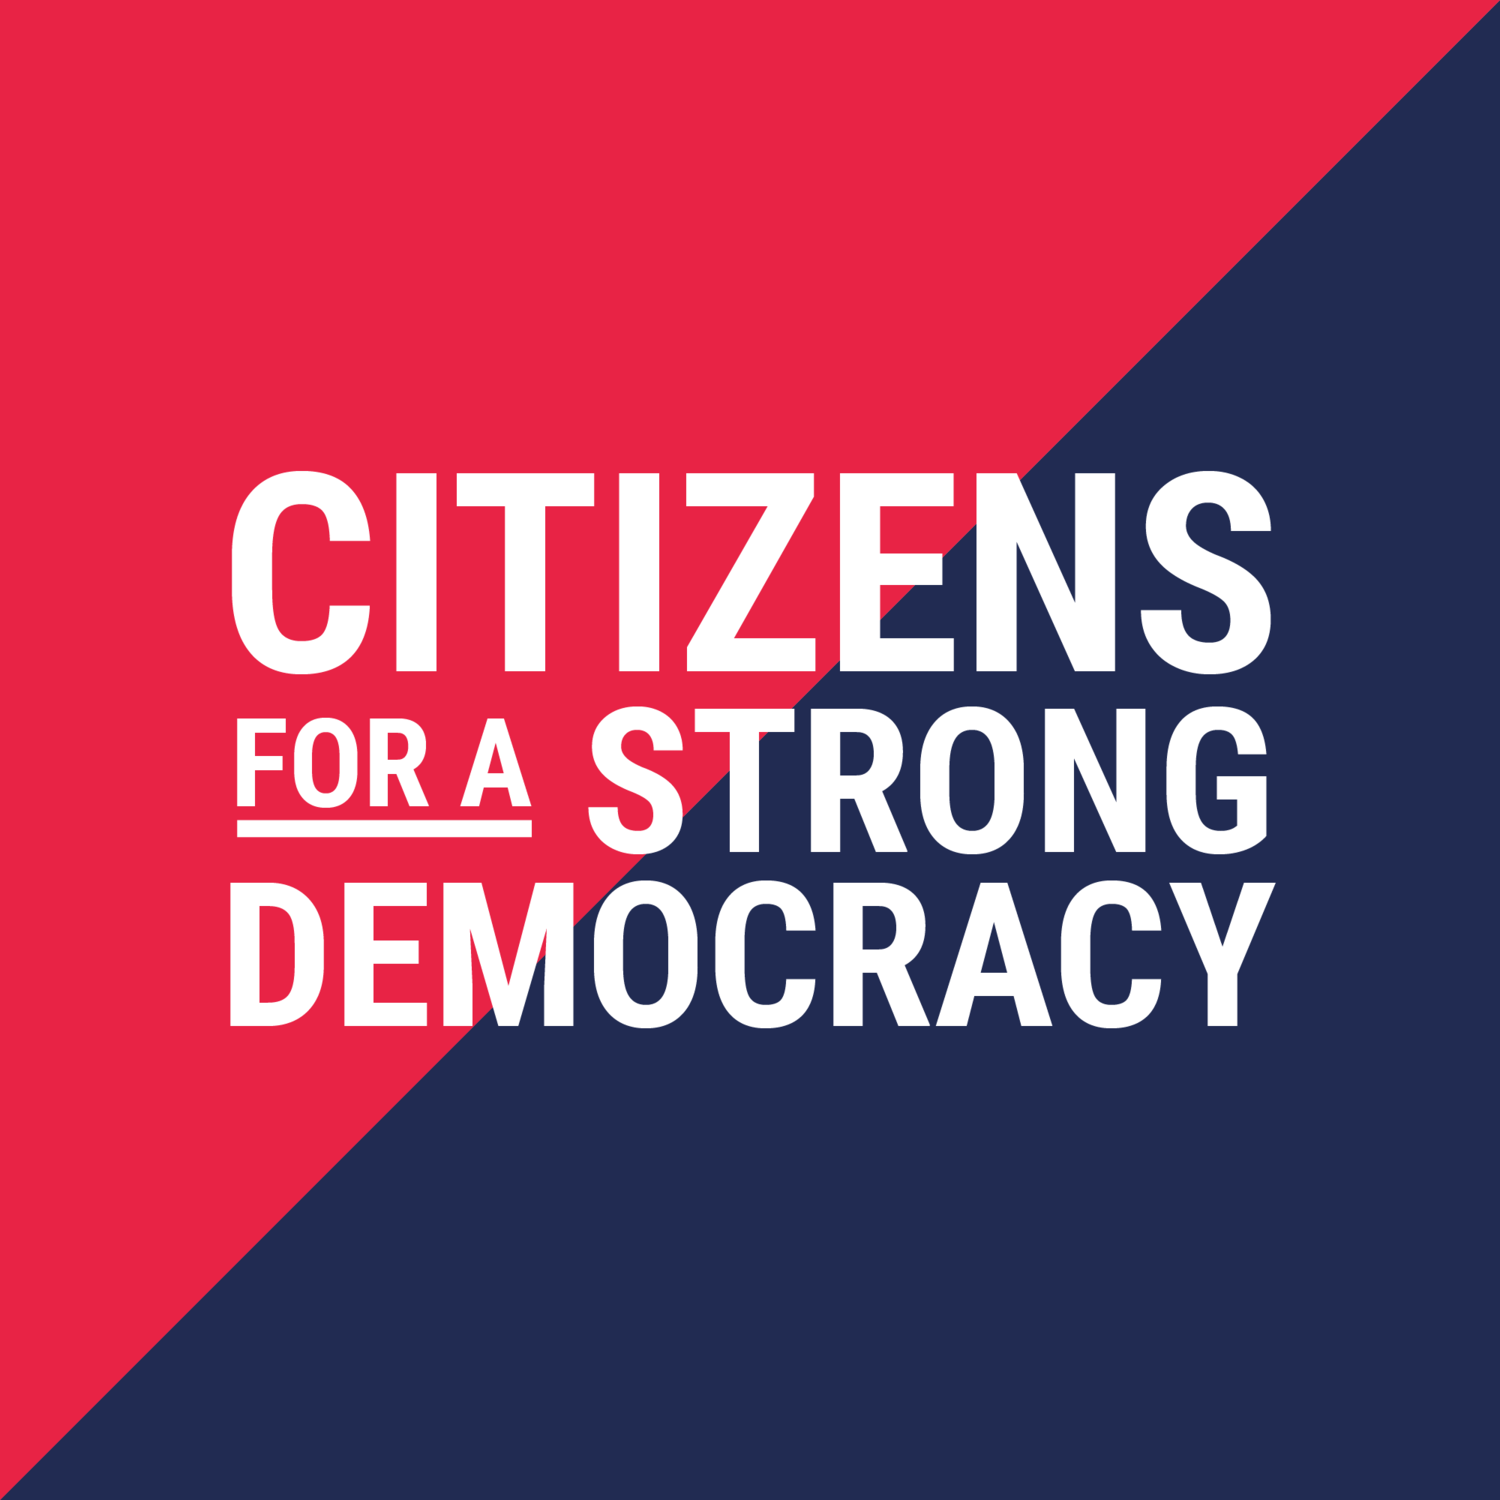 Citizens for a Strong Democracy